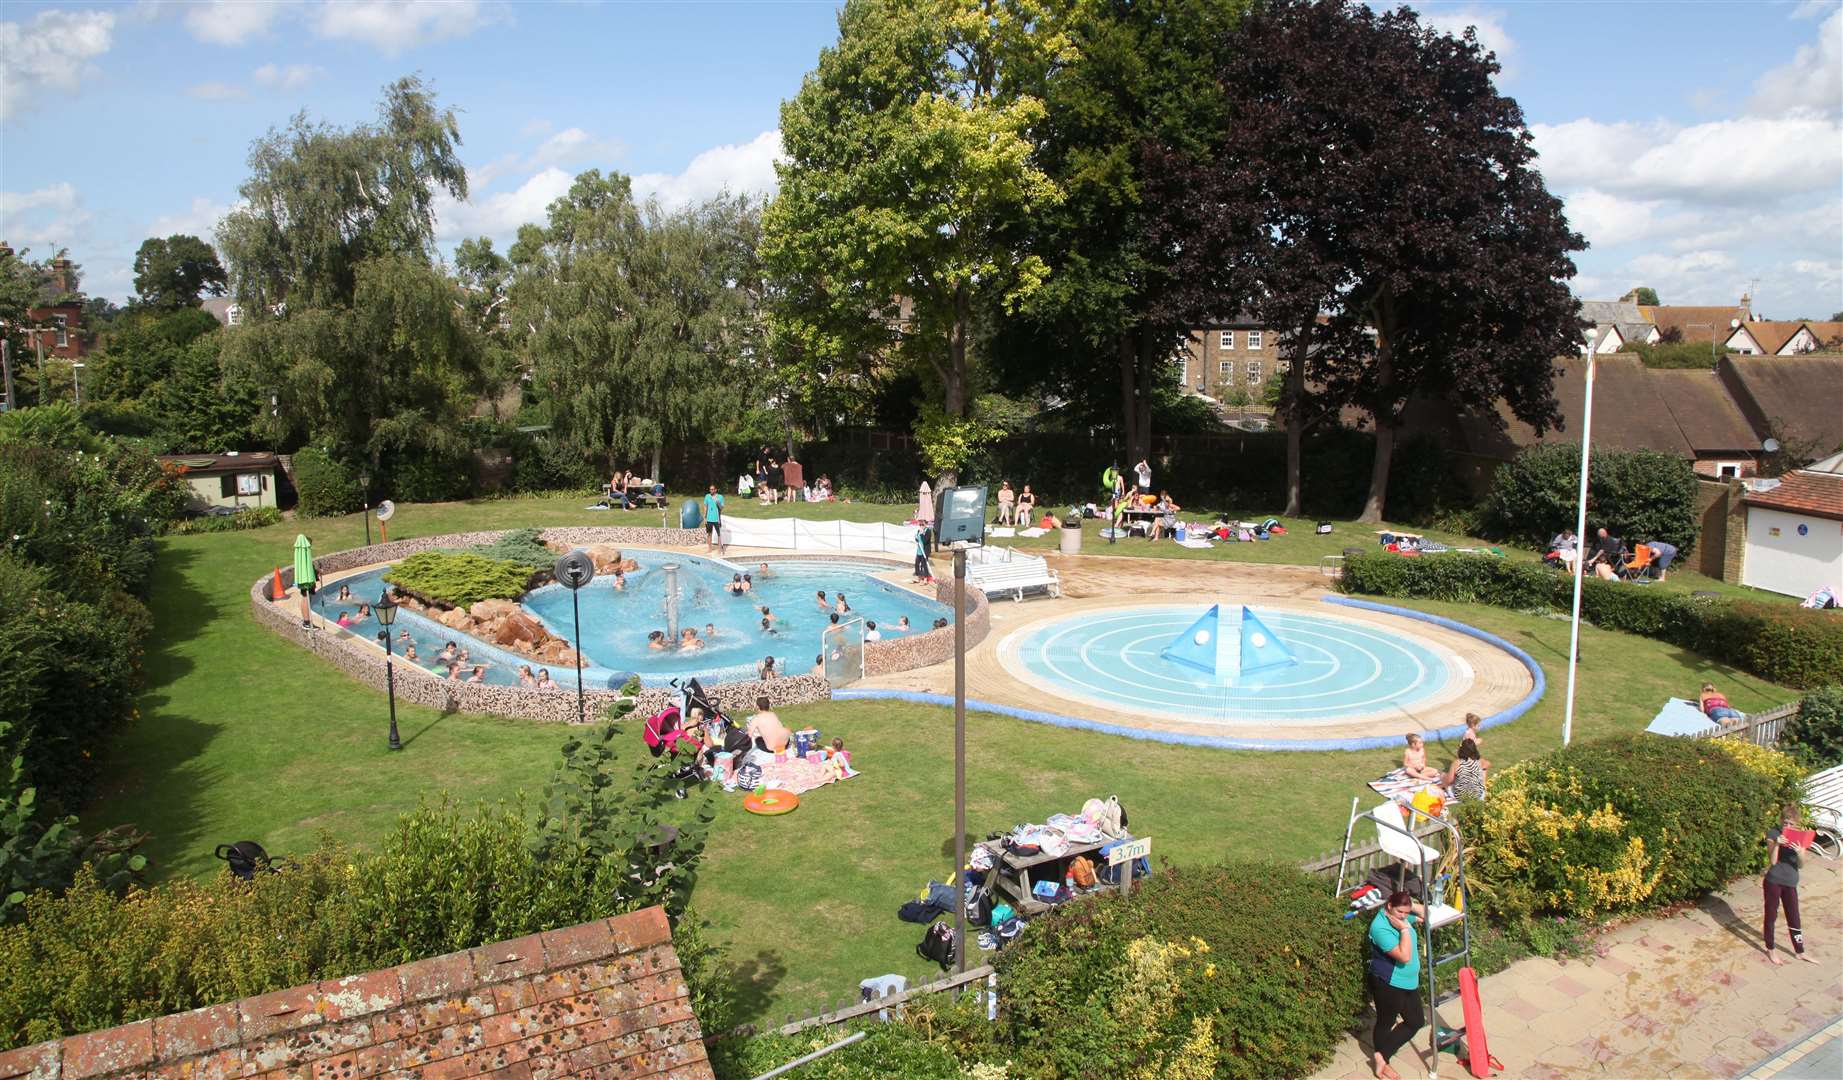 Faversham has opened its outdoor pools for the summer